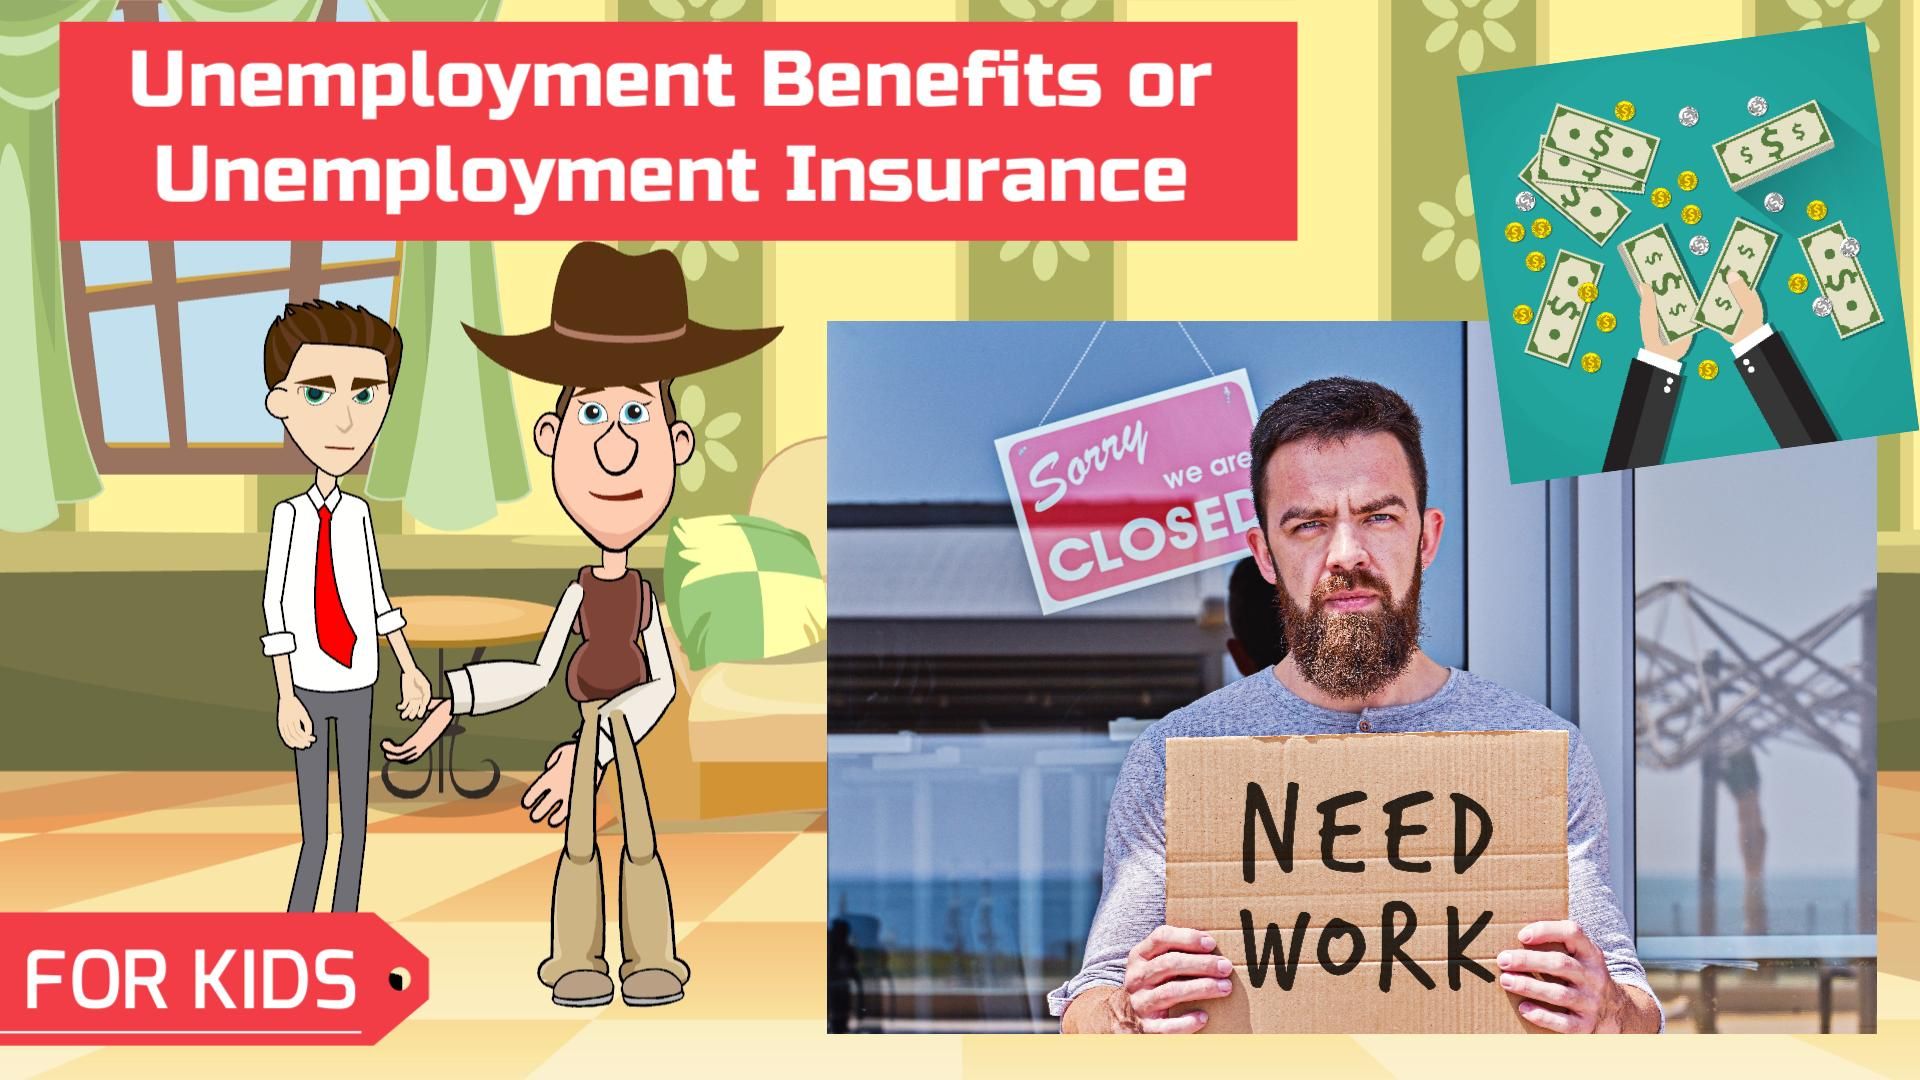 What are Unemployment Benefits or Insurance